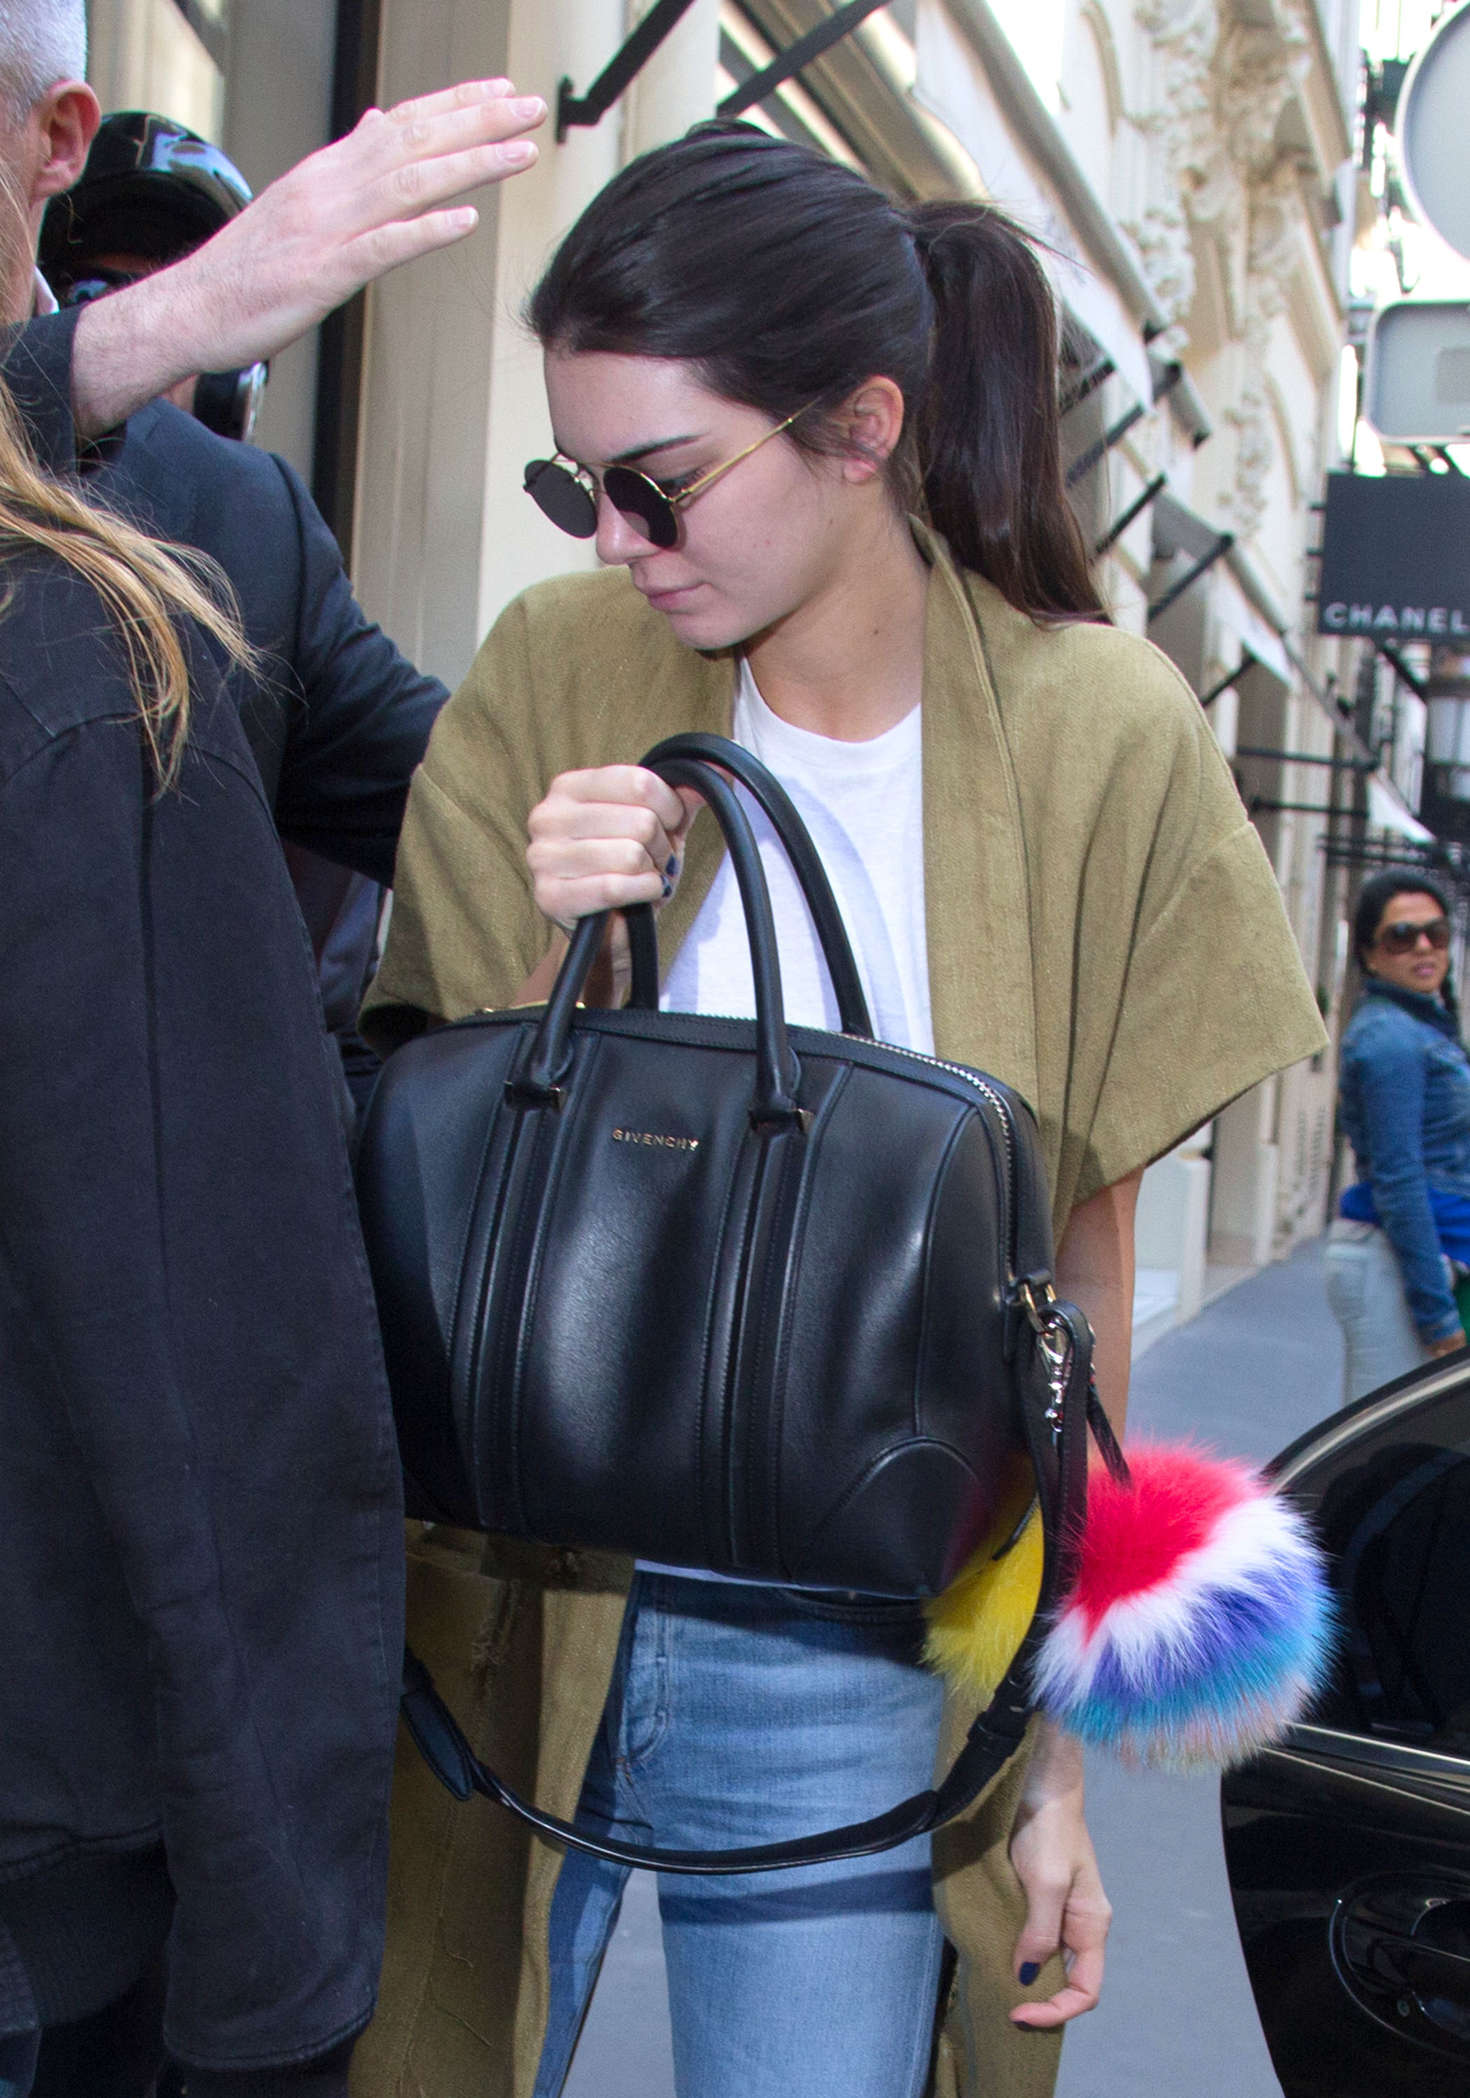 Kendall Jenner in Jeans at Chanel Store 05